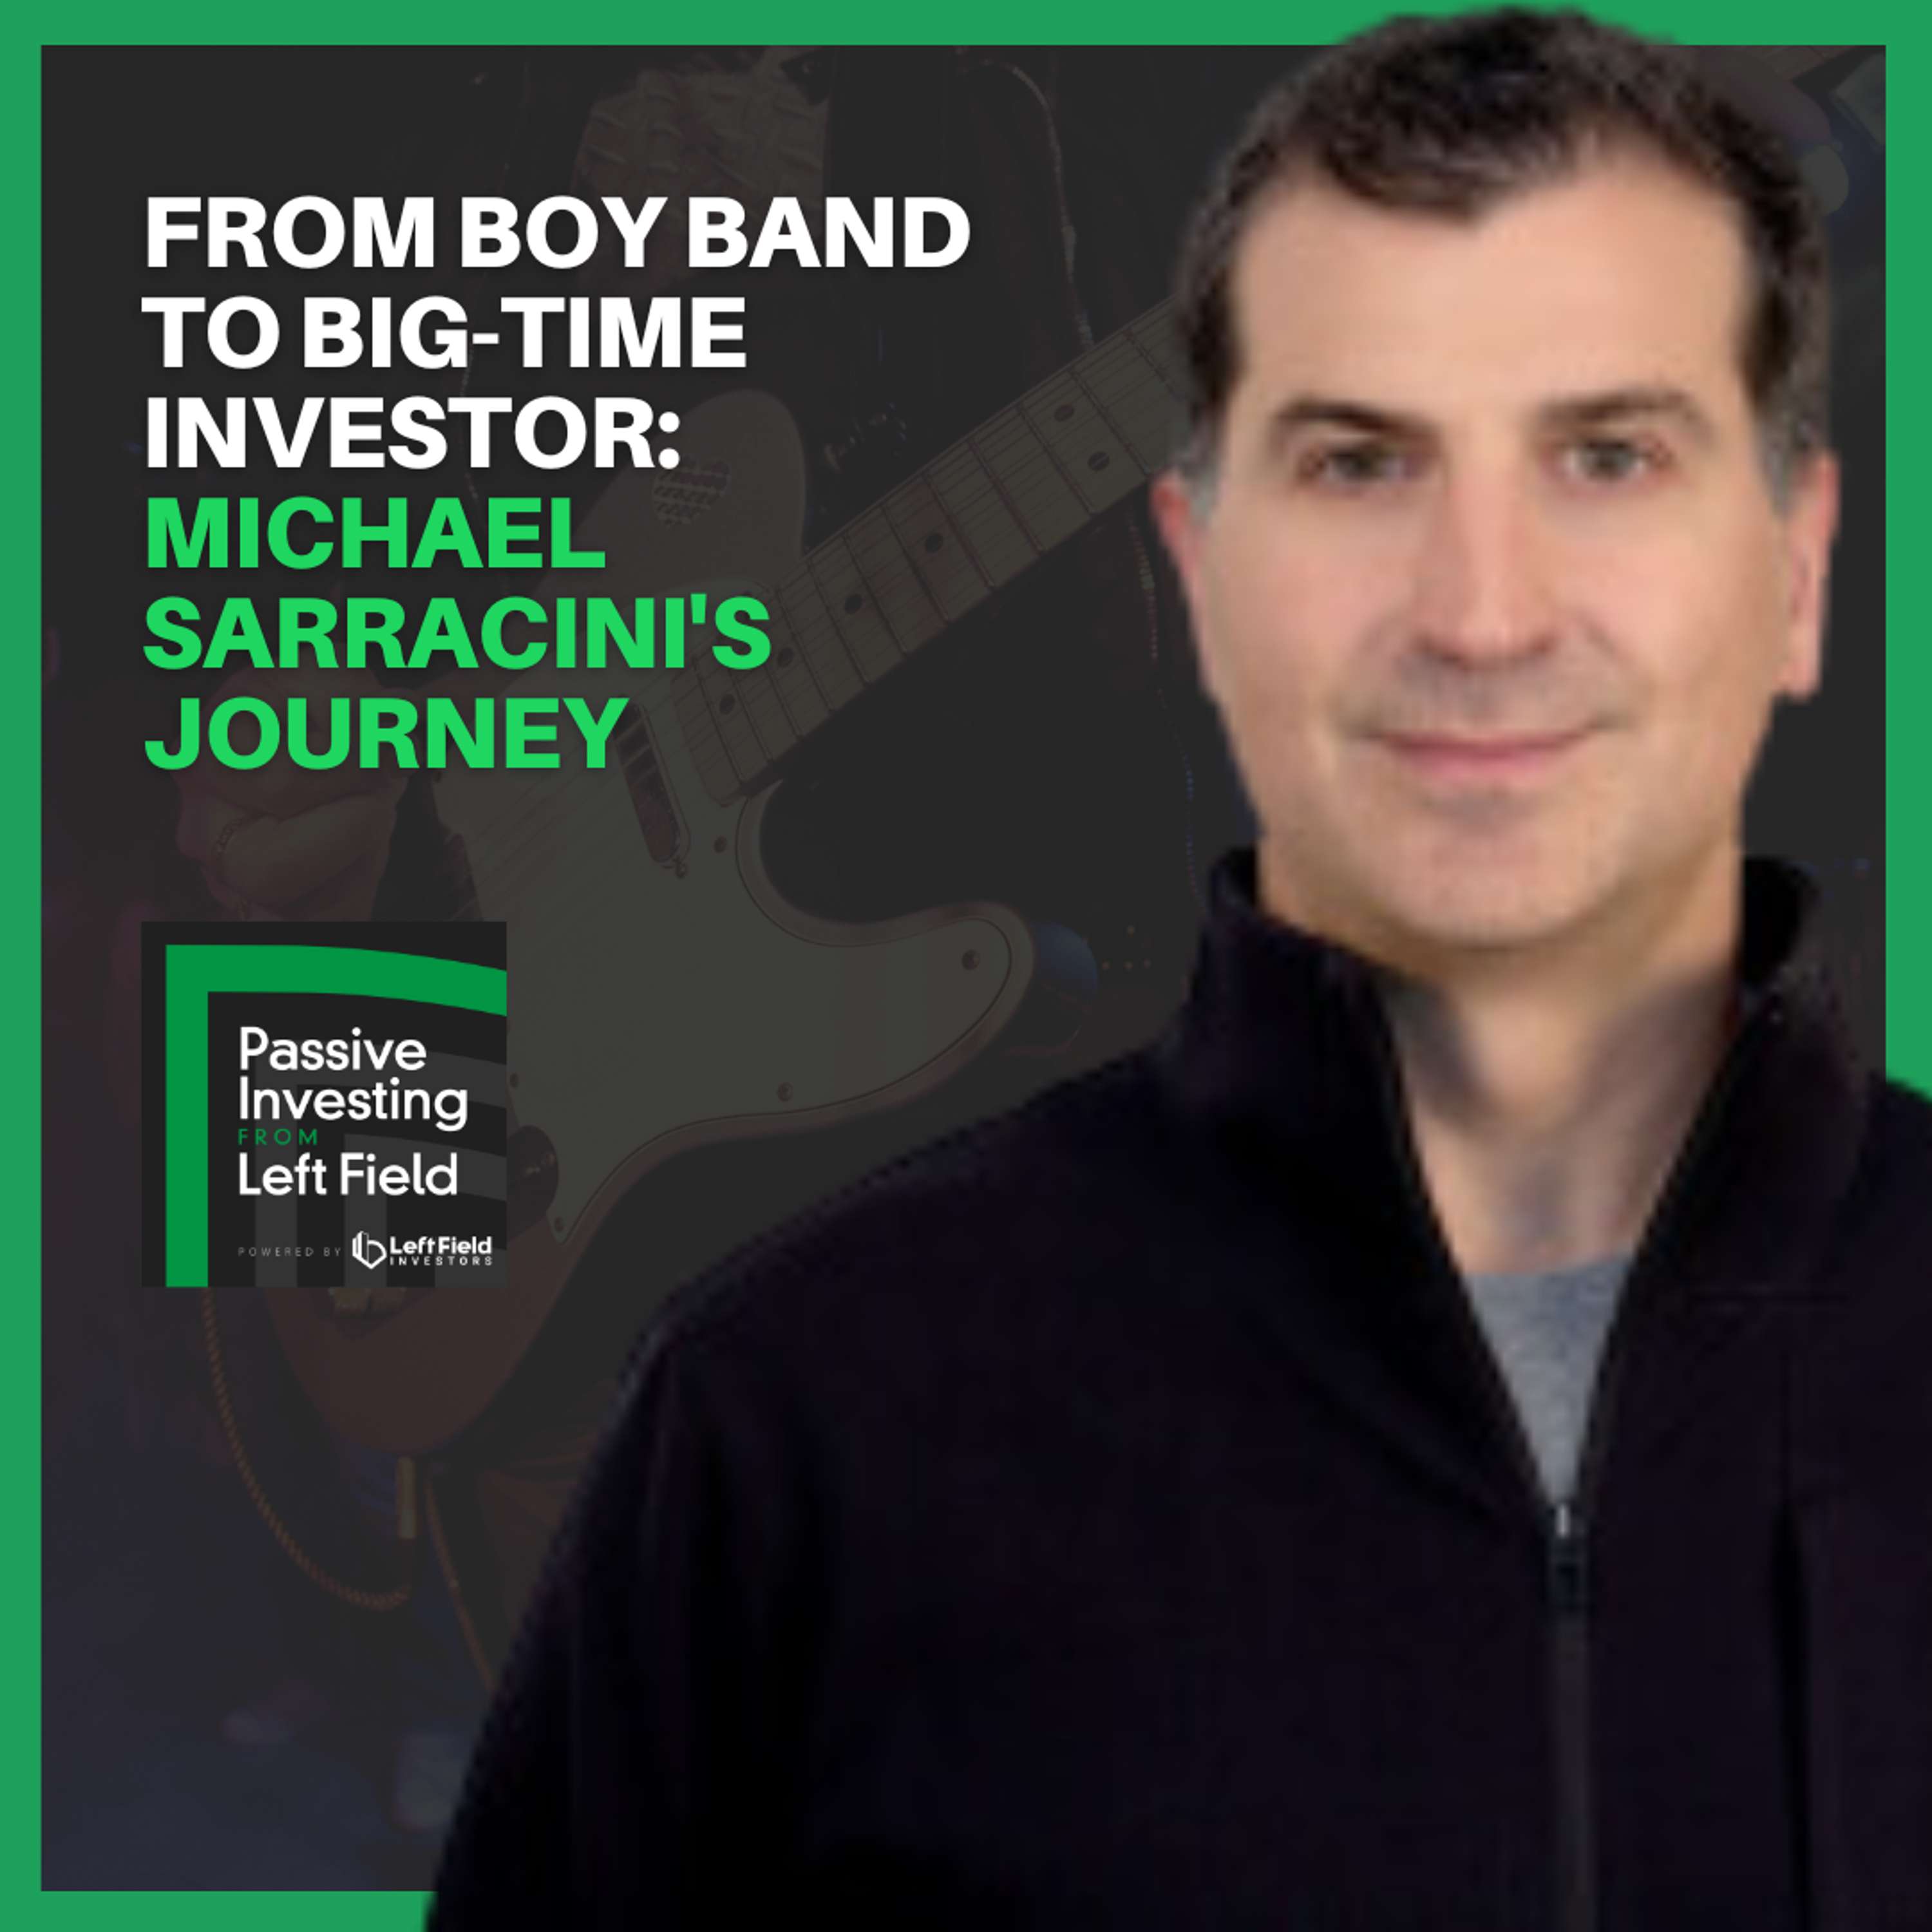 172: From Boy Band to Big-Time Investor: Michael Sarracini's Journey